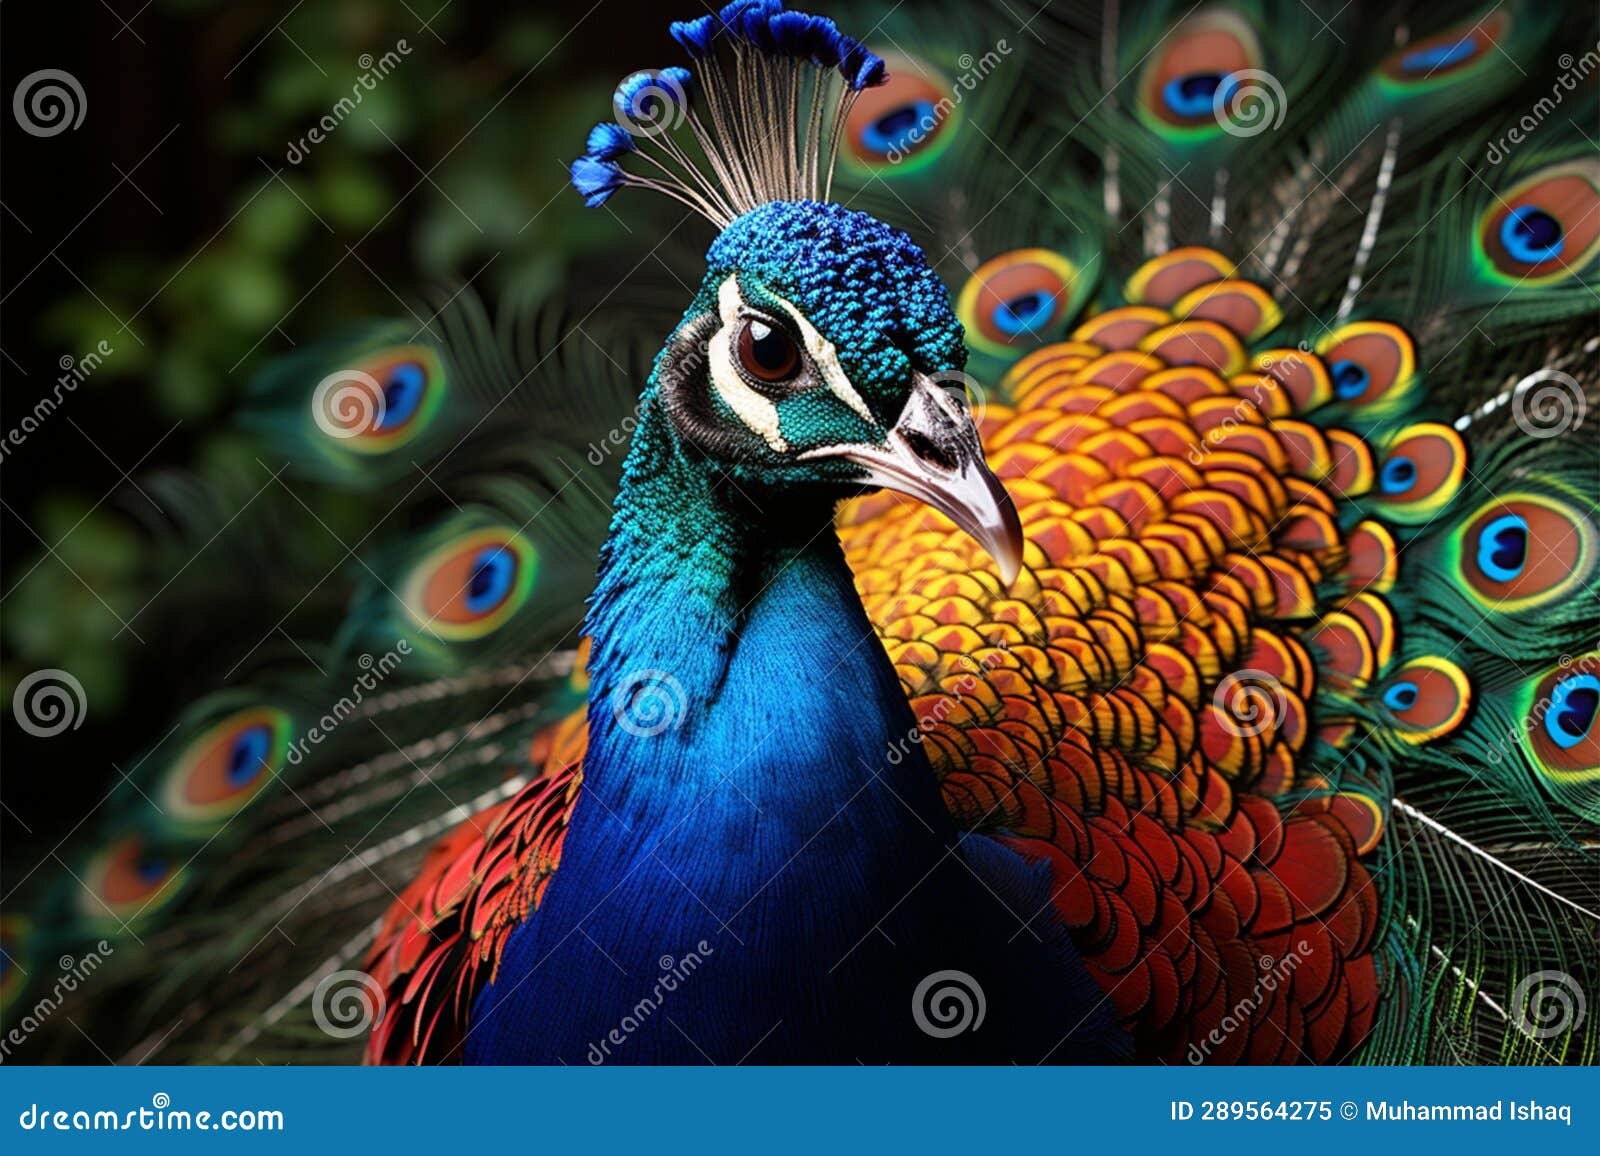 the vibrant tail feathers and graceful displays of a male peacock mesmerize